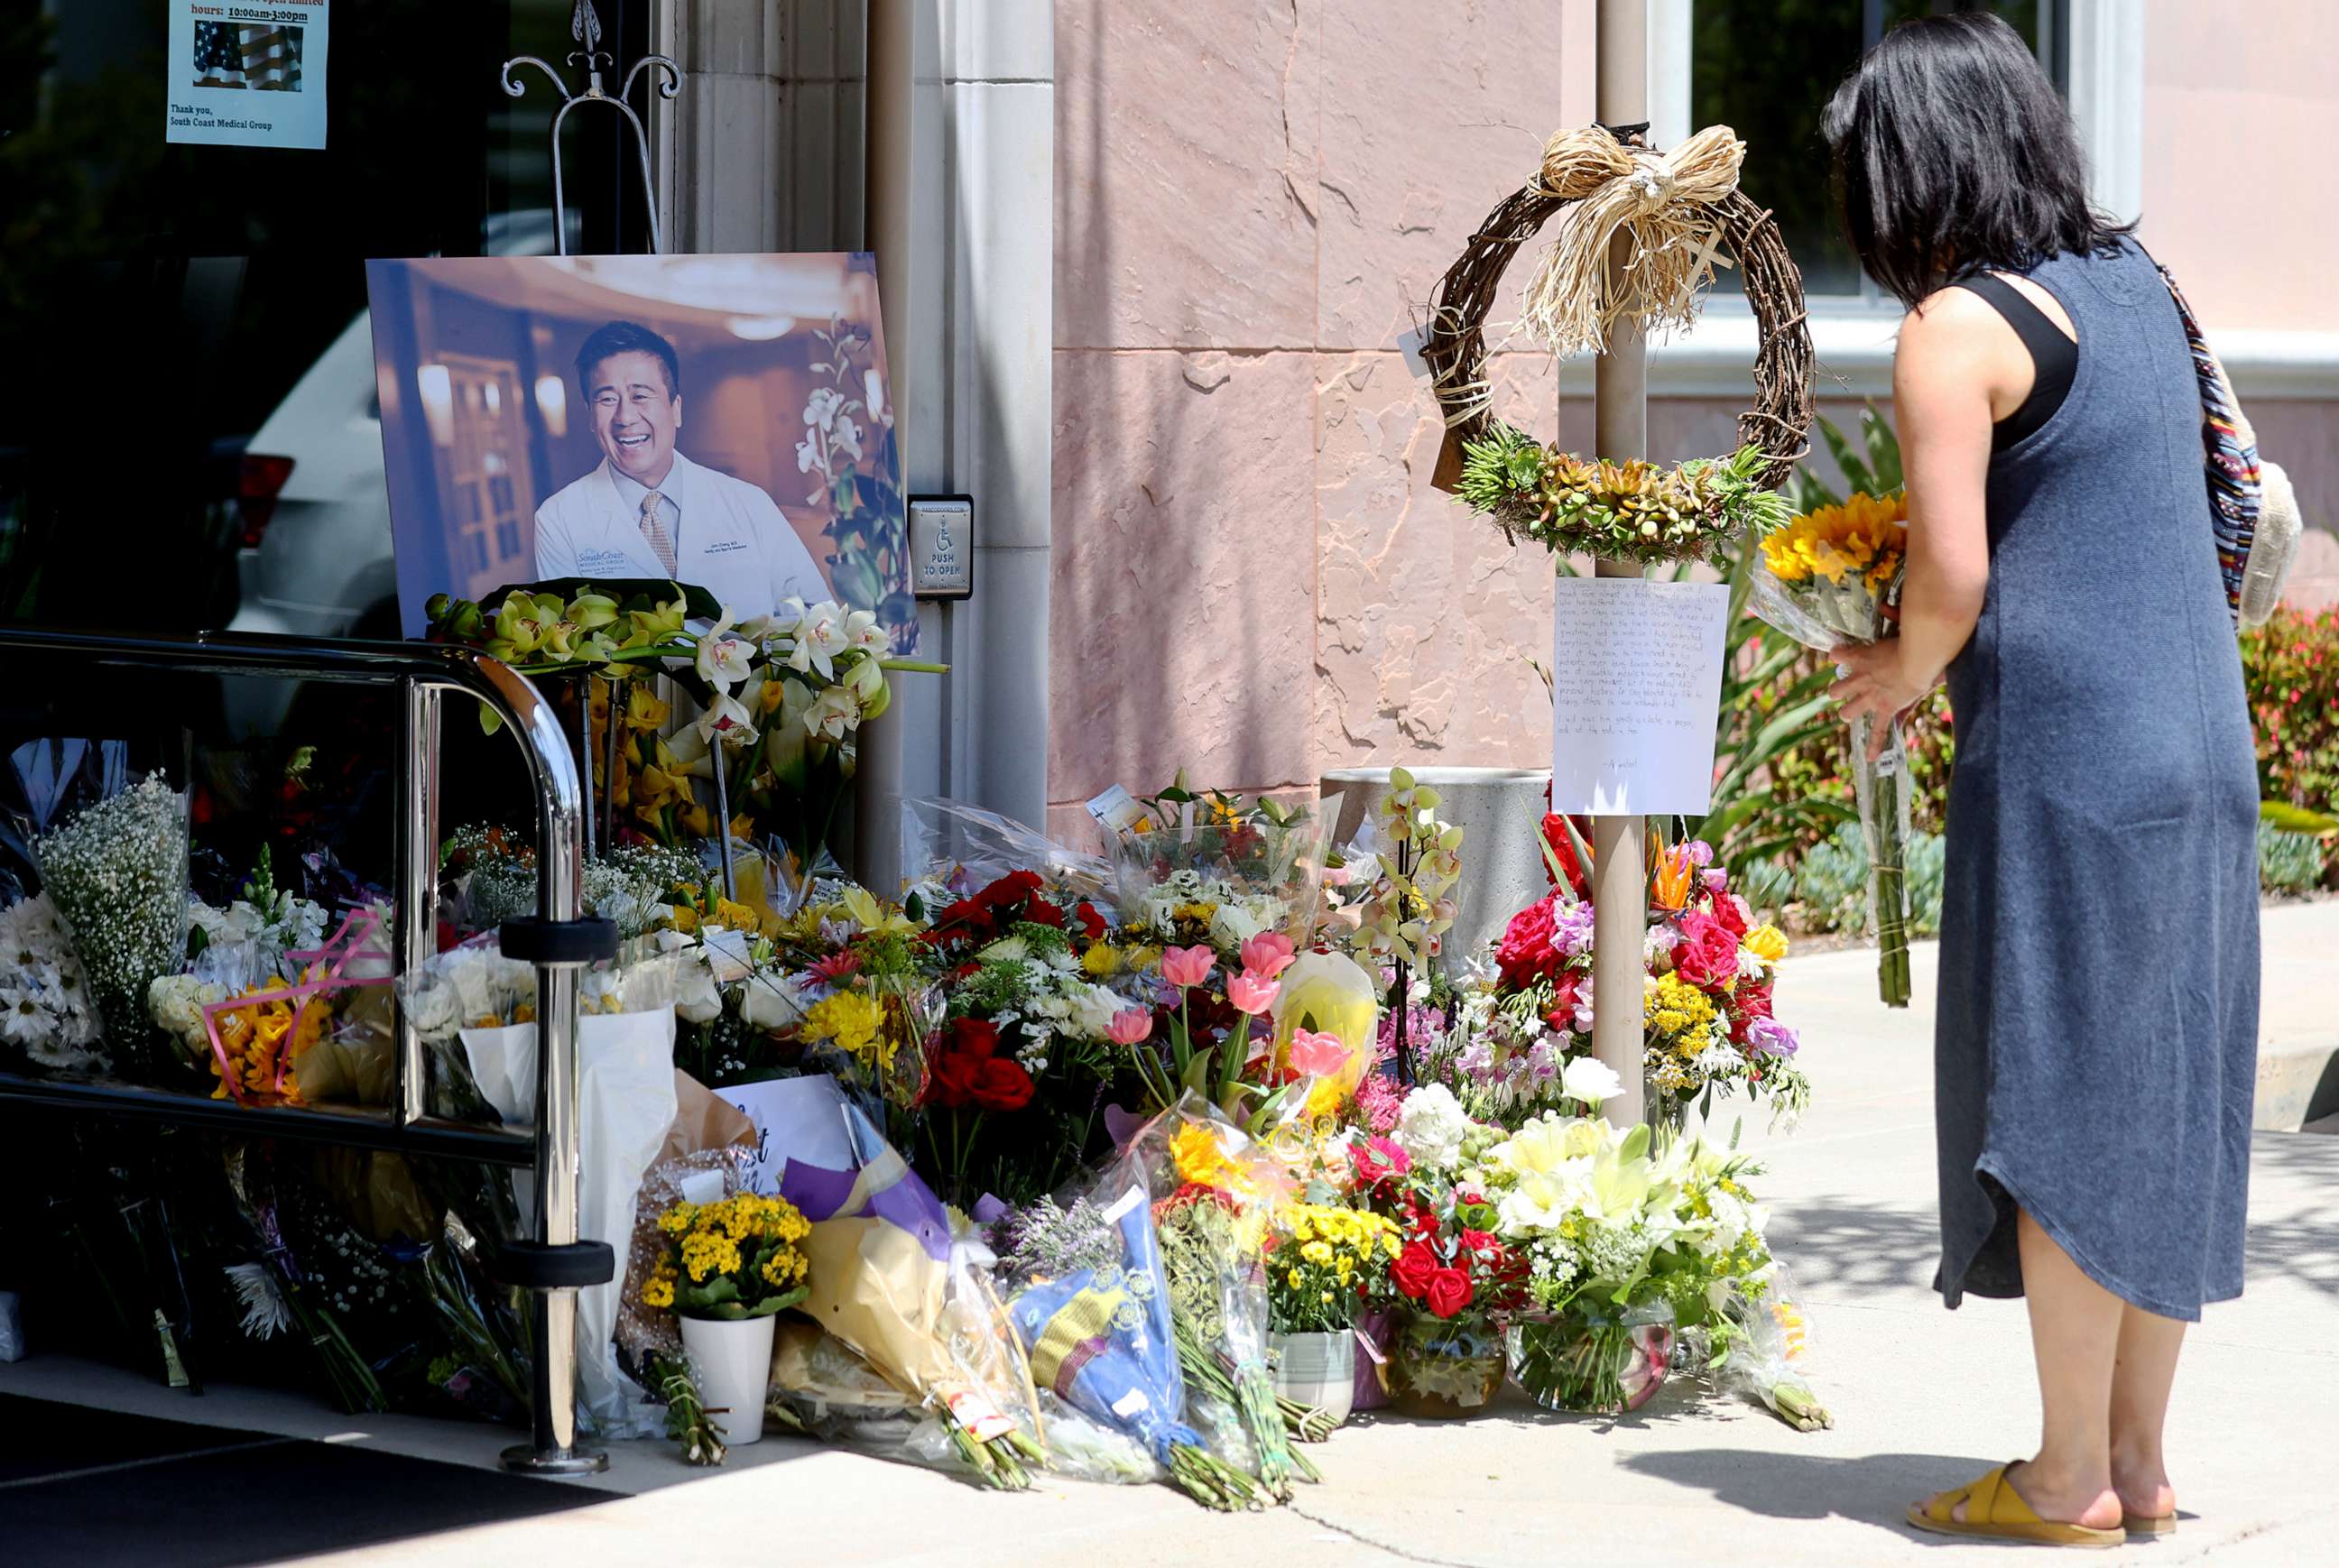 PHOTO: In this May 18, 2022, file photo, a person stands with flowers at a makeshift memorial for Dr. John Cheng outside his office in Aliso Viejo, Calif.